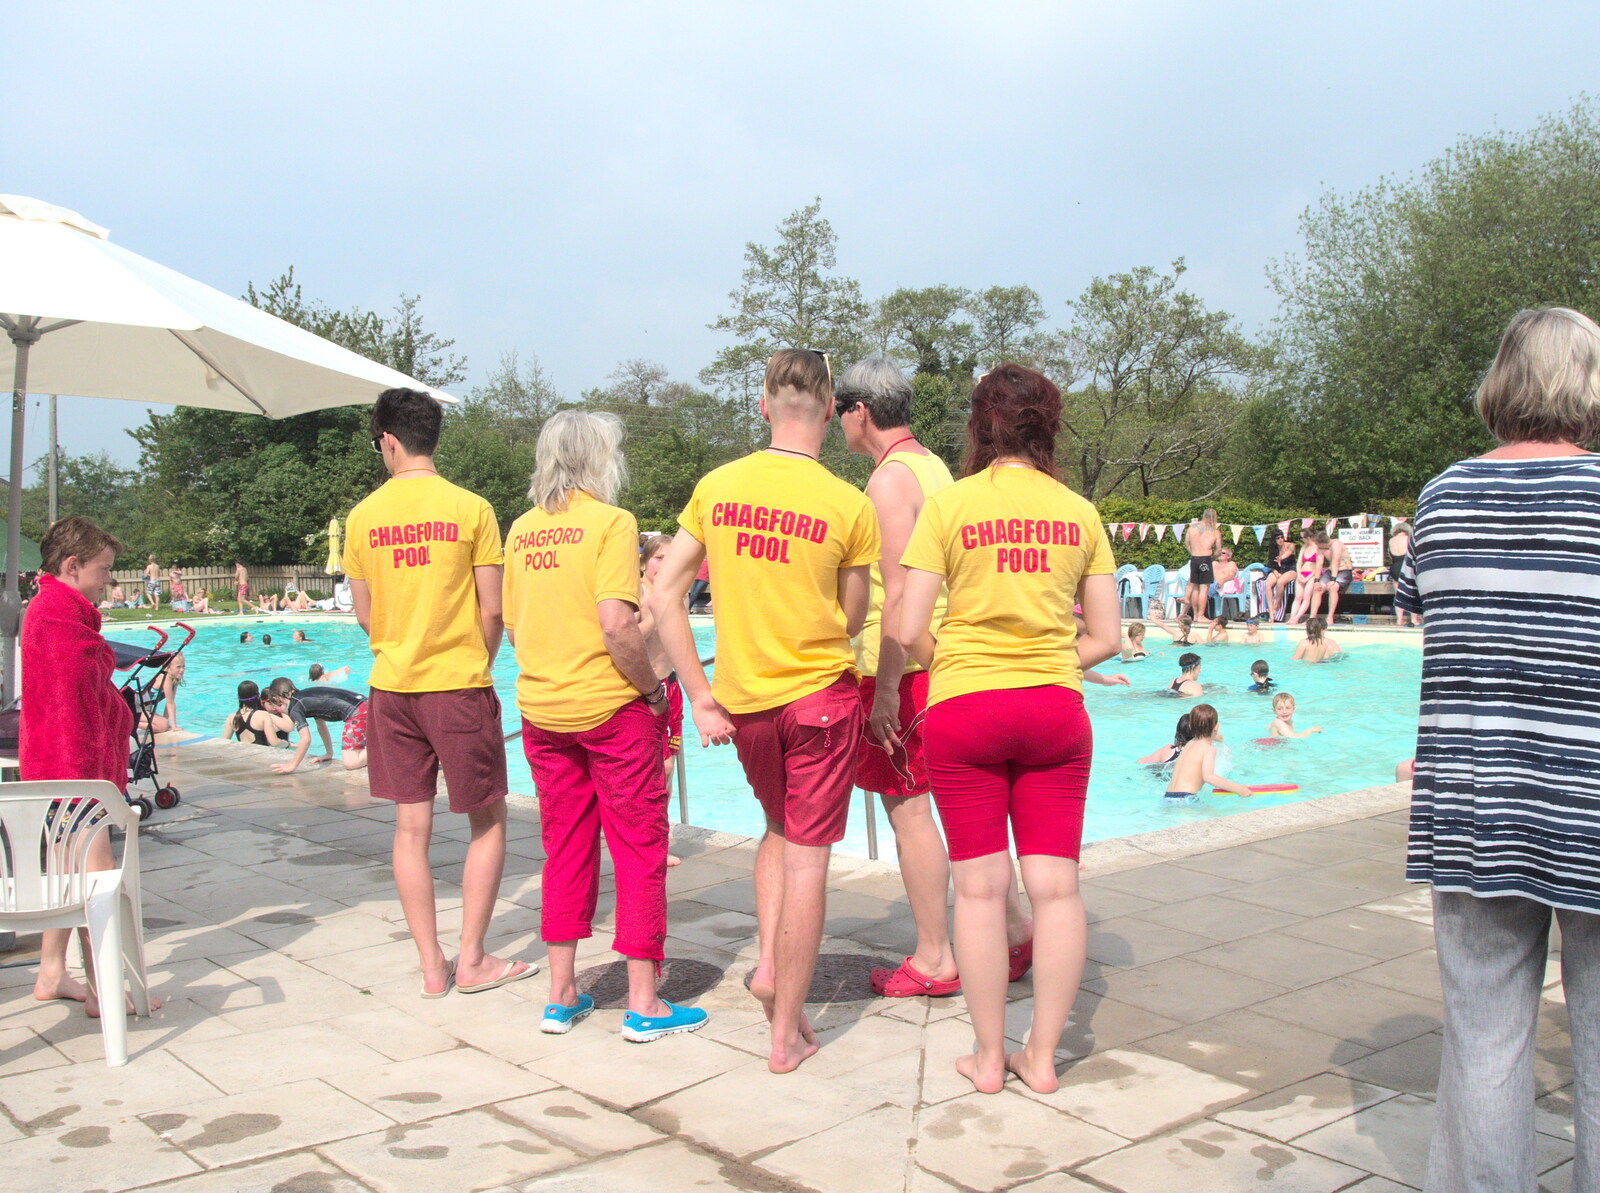 The lifeguards again from The Grand Re-opening of the Chagford Lido, Chagford, Devon - 28th May 2016